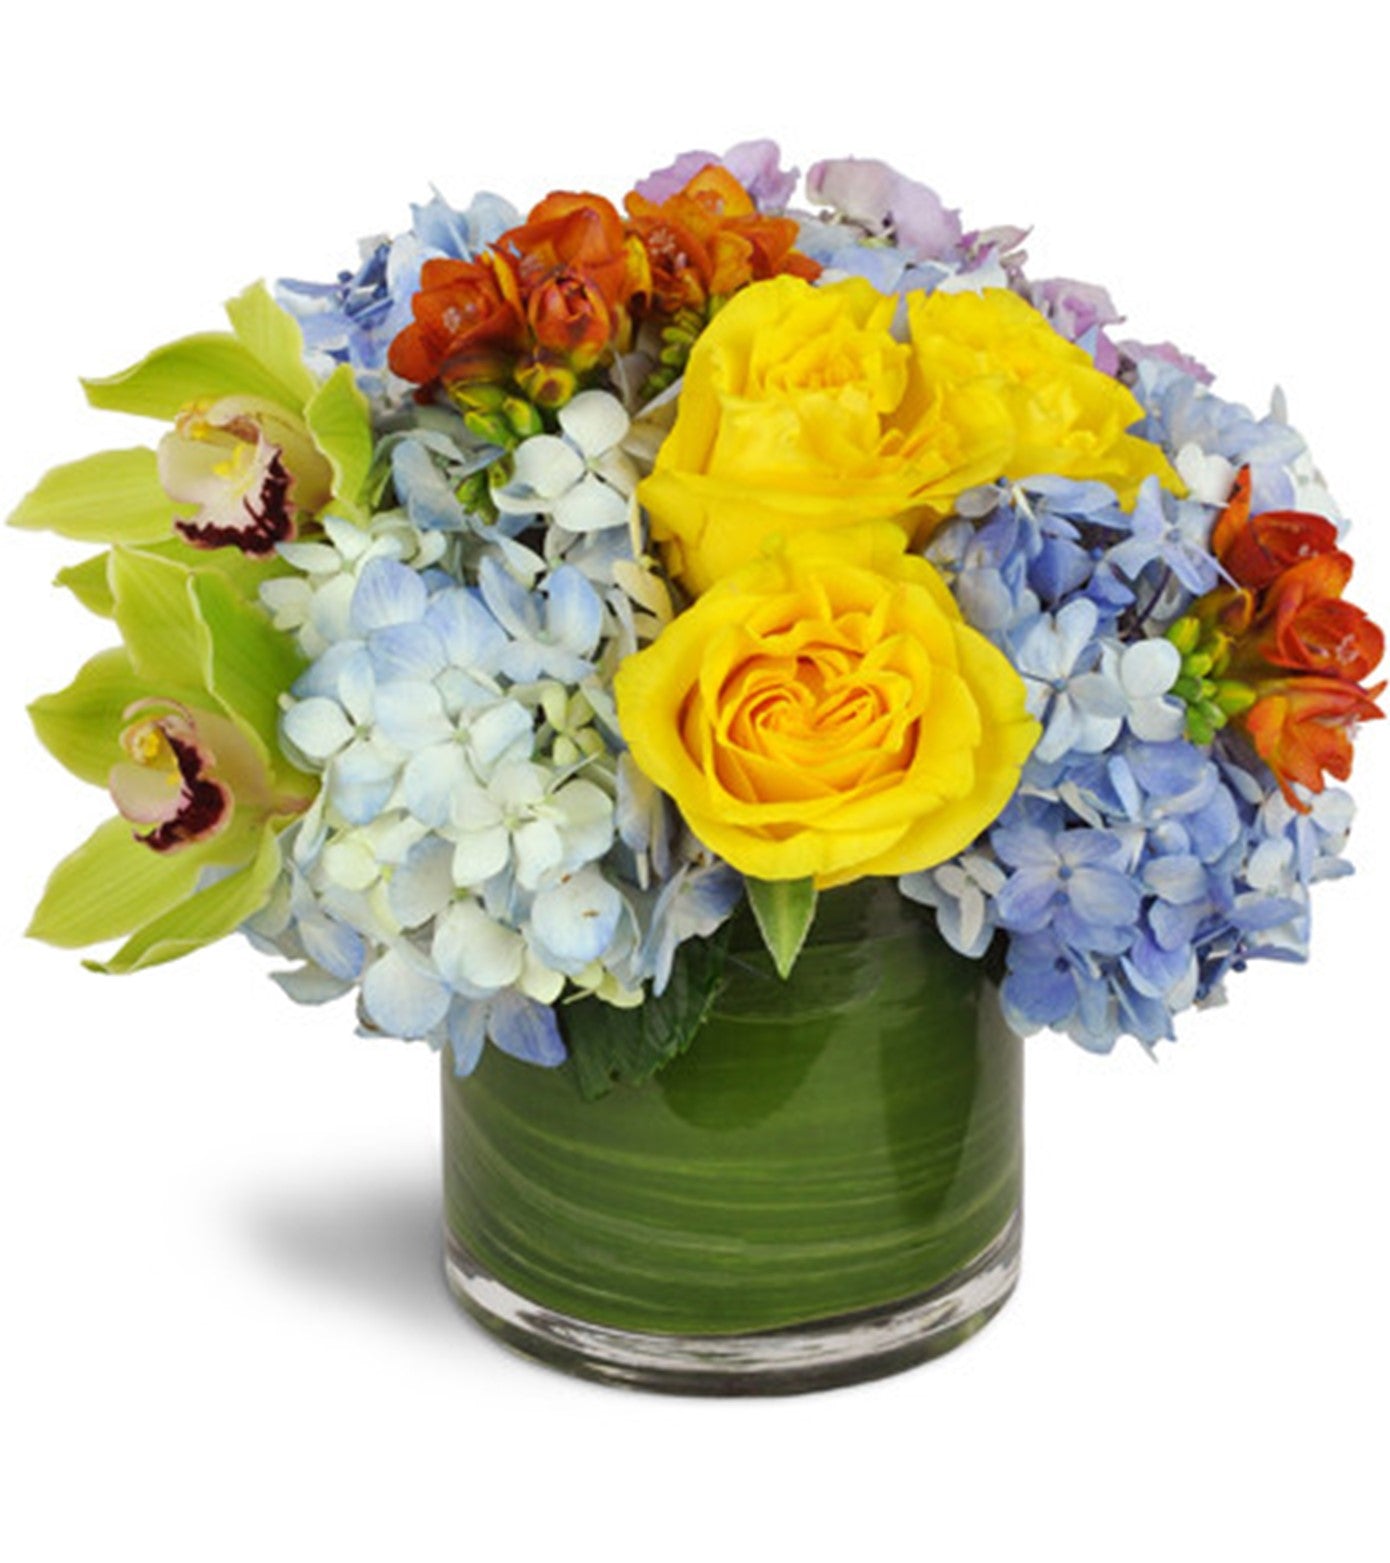 Clear Skies Bouquet-Refreshing bouquet reminiscent of a clear, blue sky